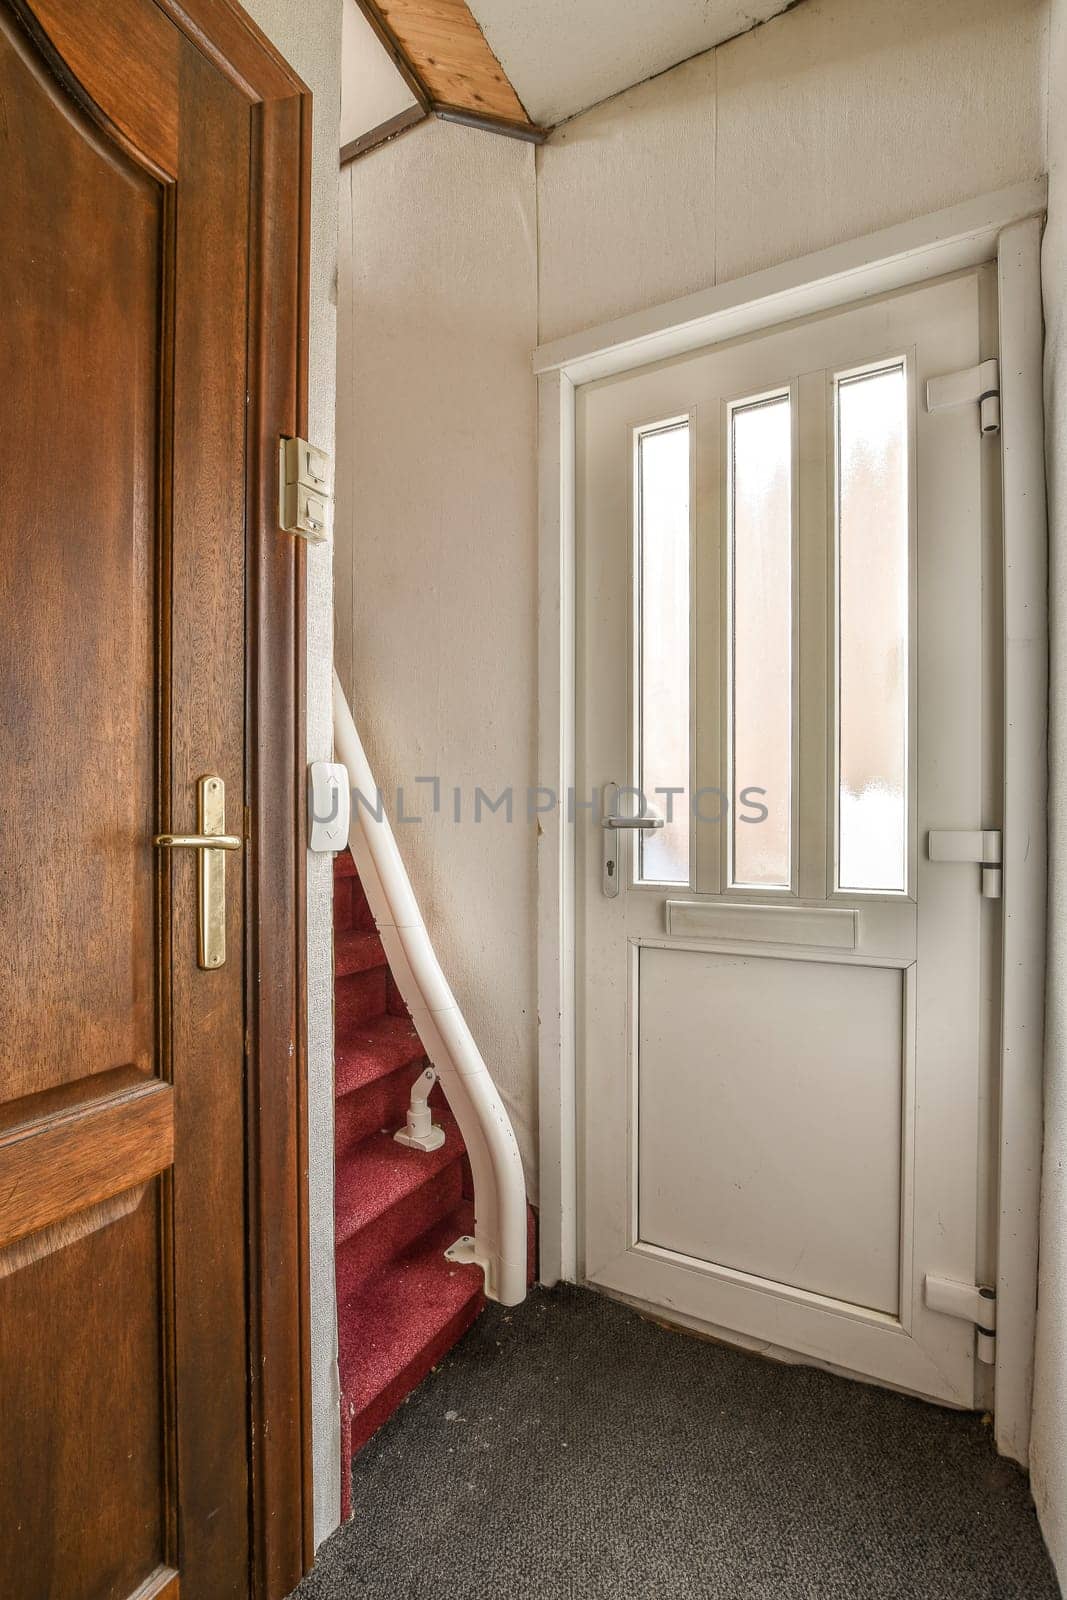 the door to a stairwell with a red staircase by casamedia